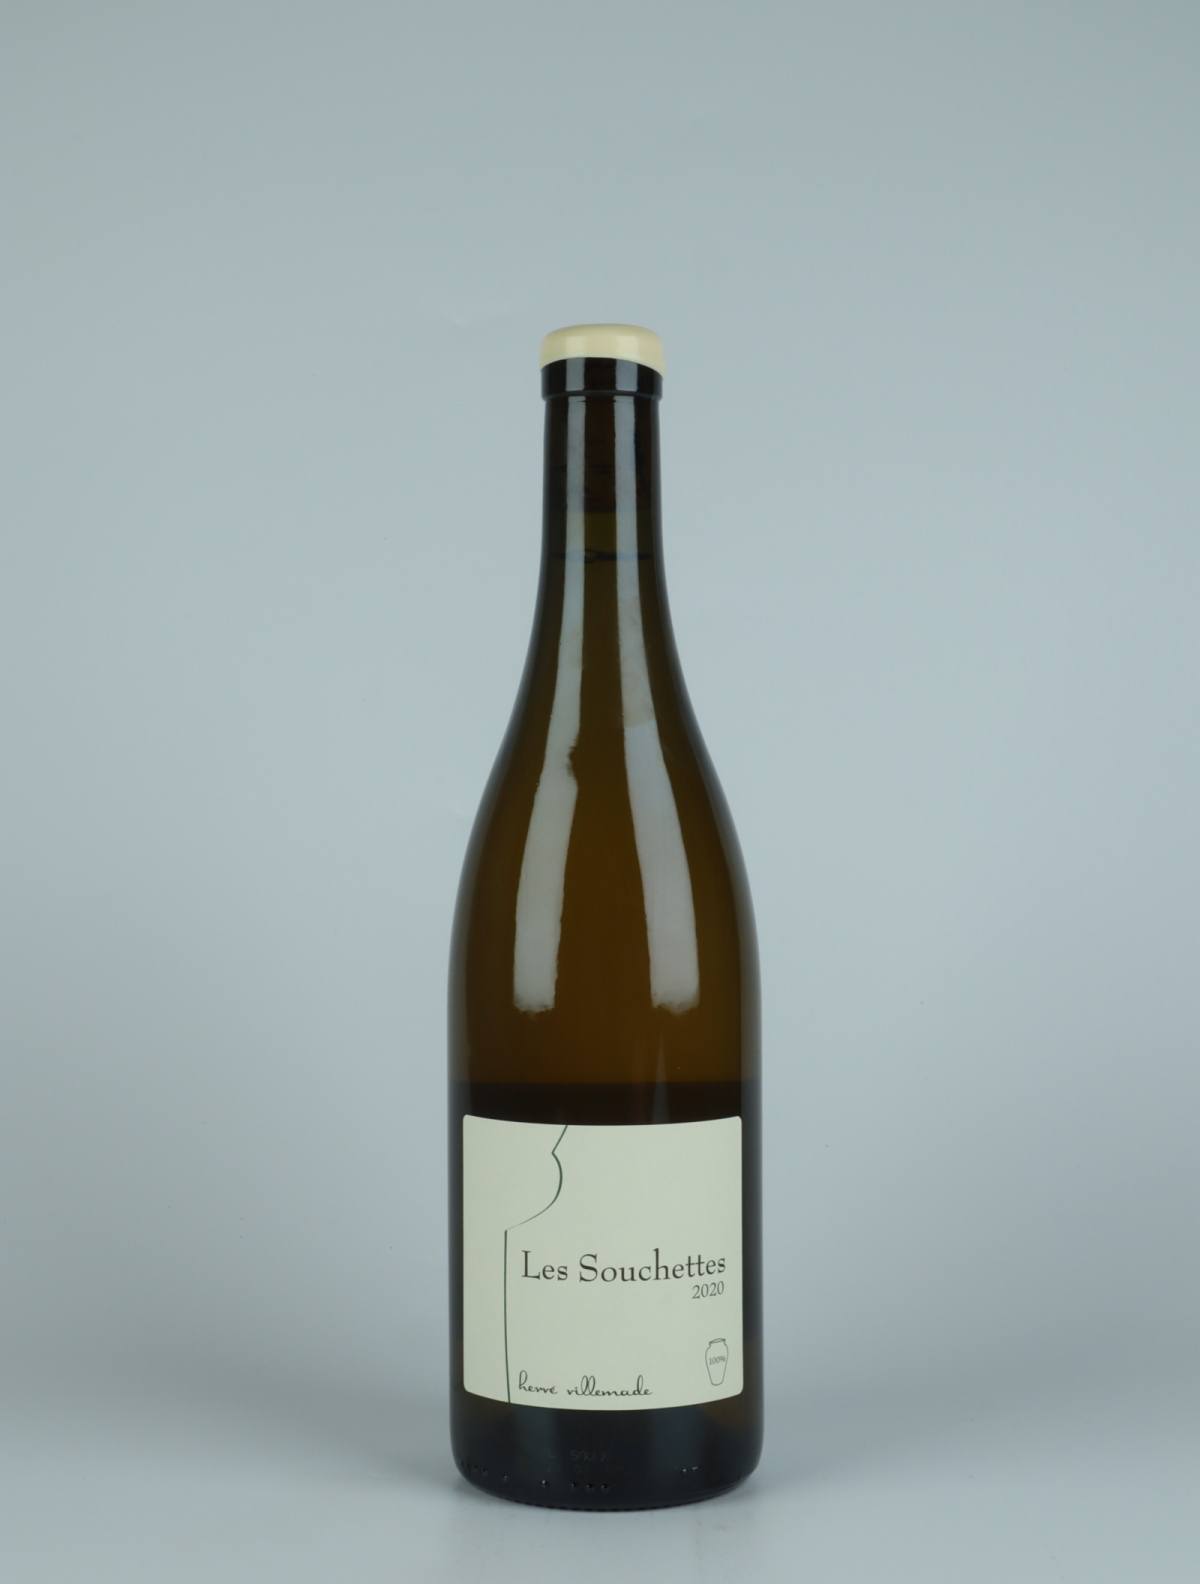 A bottle 2020 Les Souchettes White wine from Hervé Villemade, Loire in France